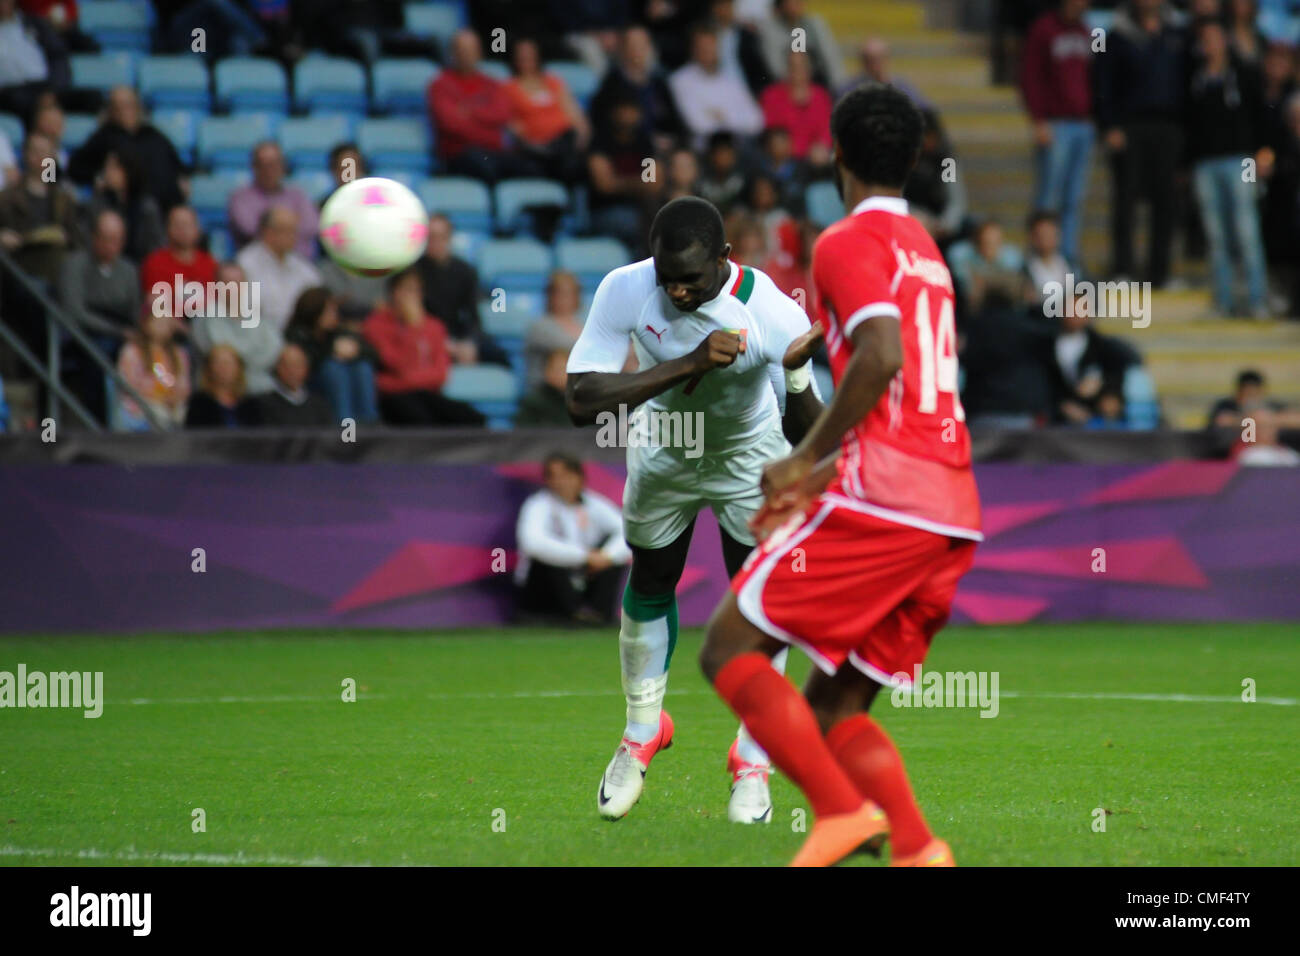 01.08.2012 Coventry, England. Moussa KONATE (Senegal) heads the equaliser and celebrates during the Olympic Football Men's Preliminary game between Senegal and United Arab Emirates from the City of Coventry Stadium Stock Photo